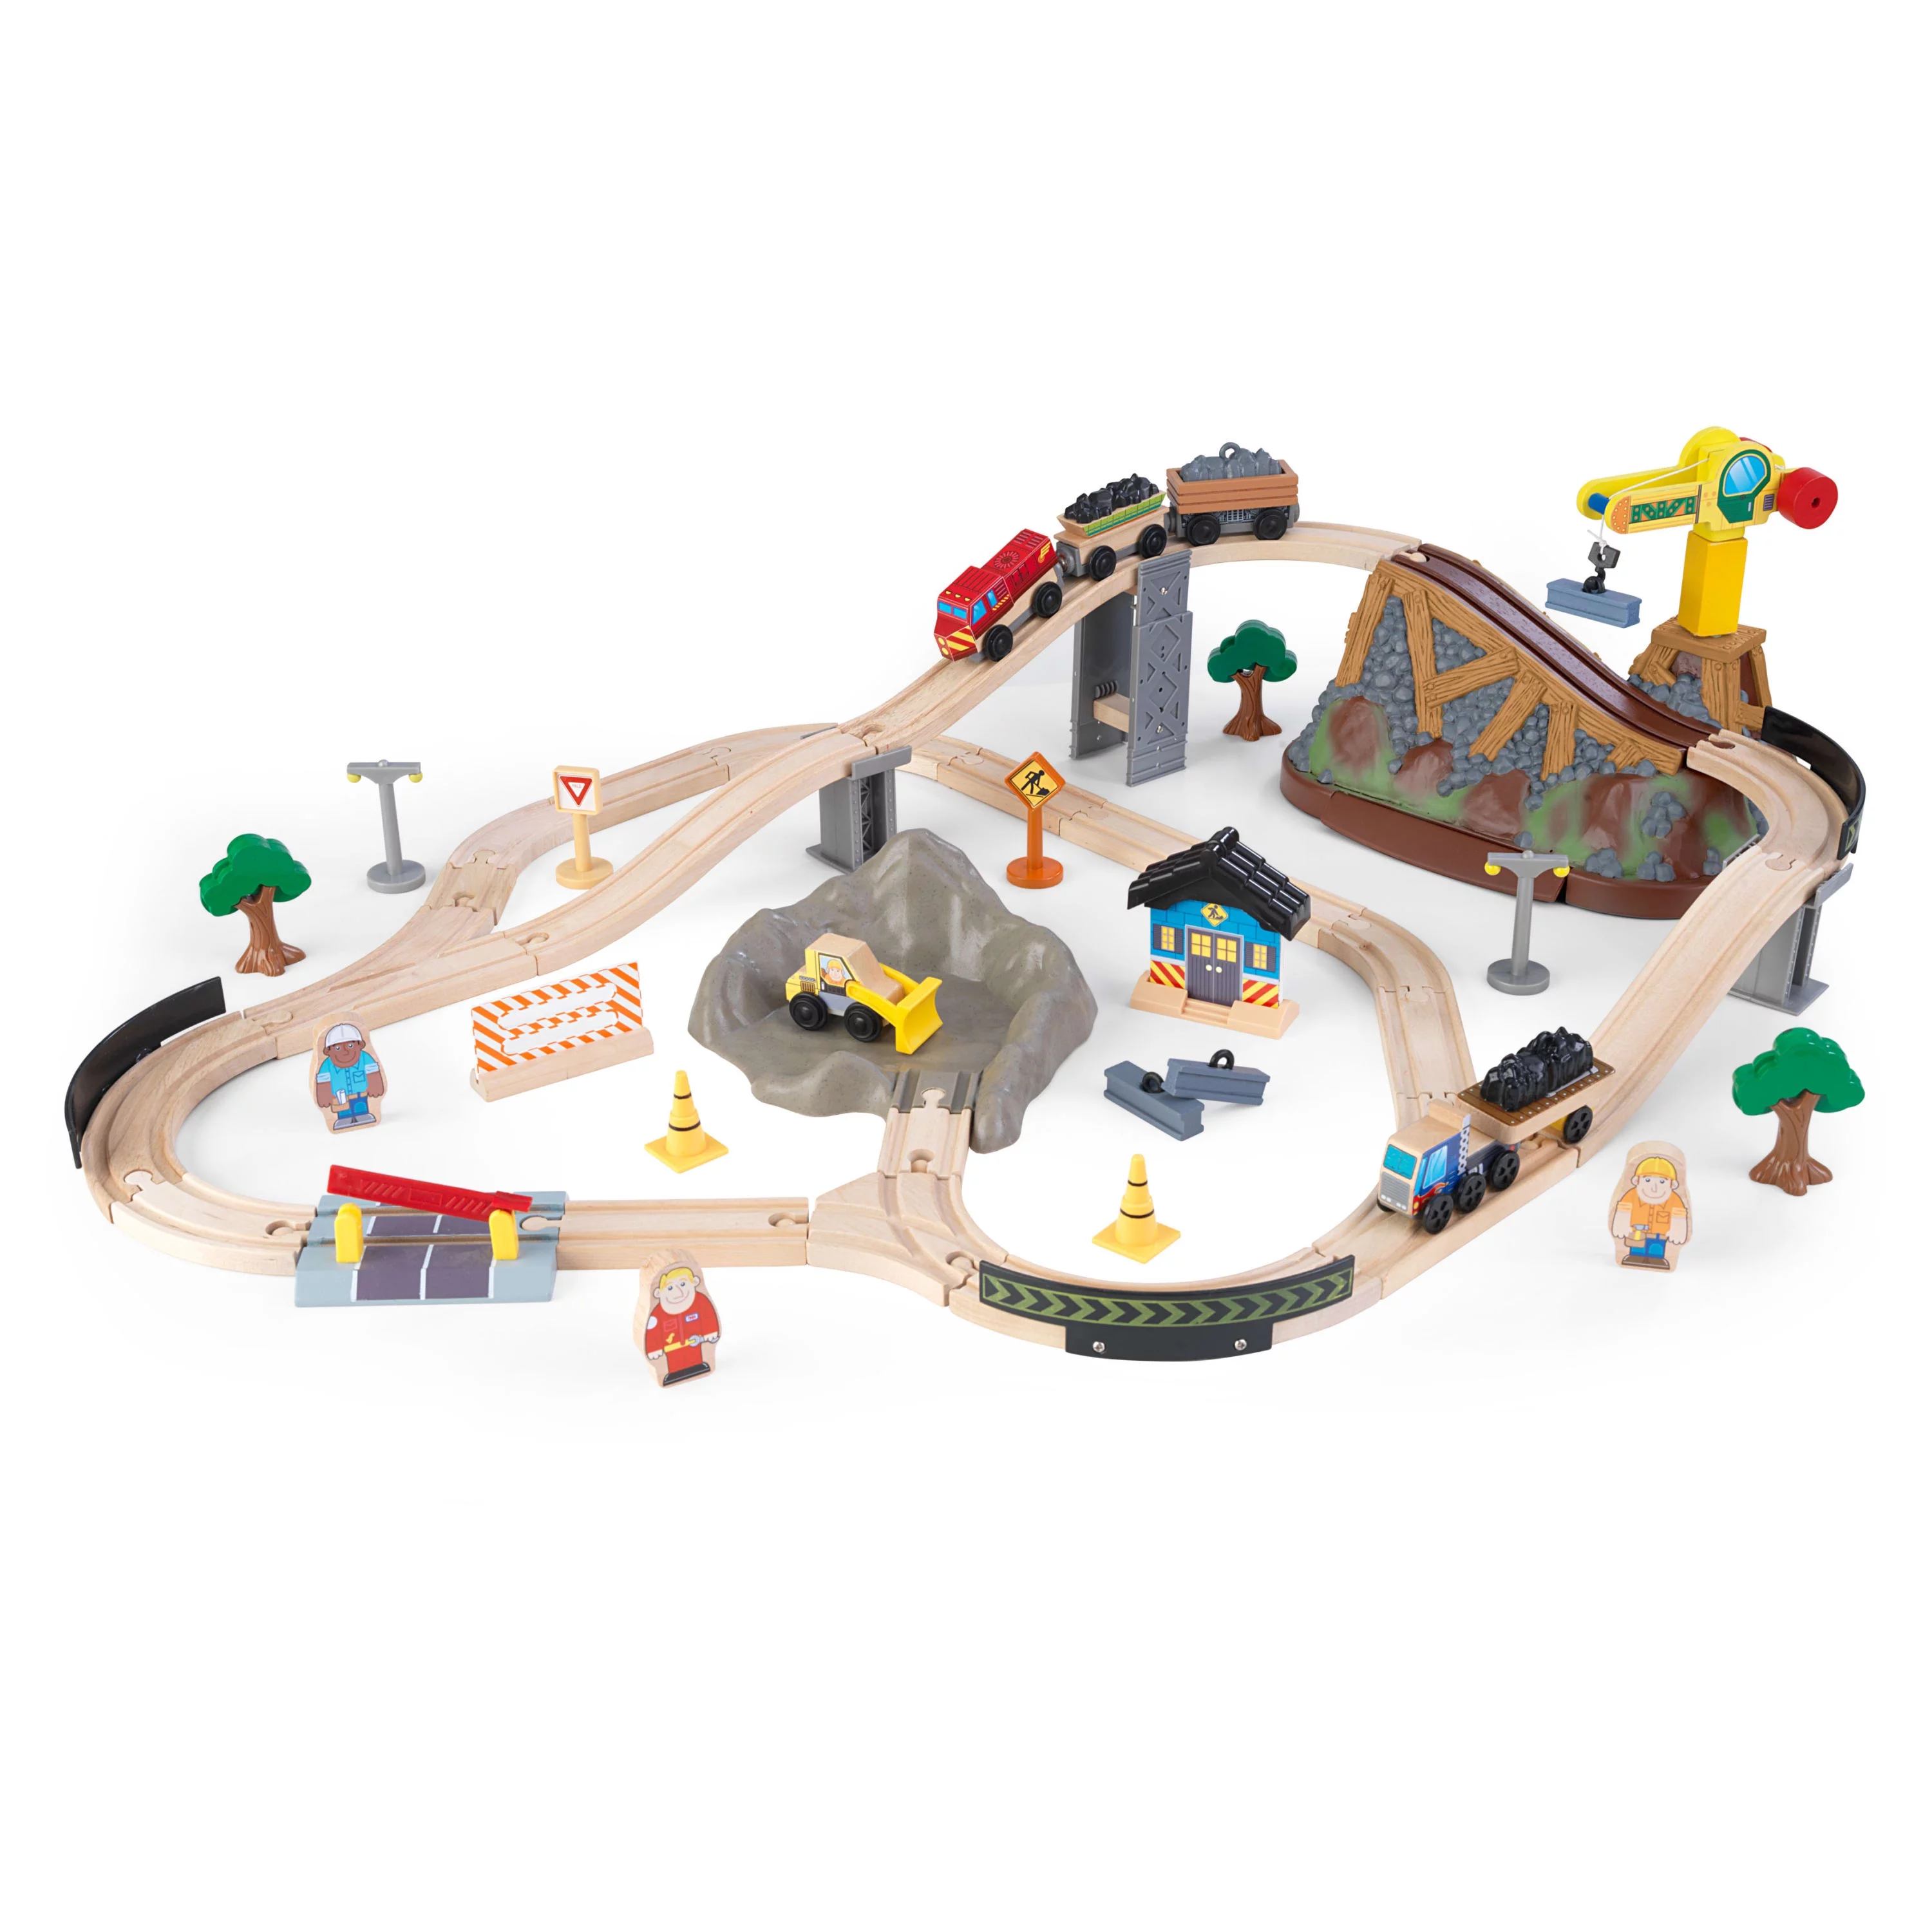 KidKraft Bucket Top Construction Wood Train Set with Crane & 61 Pieces, For Ages 3+